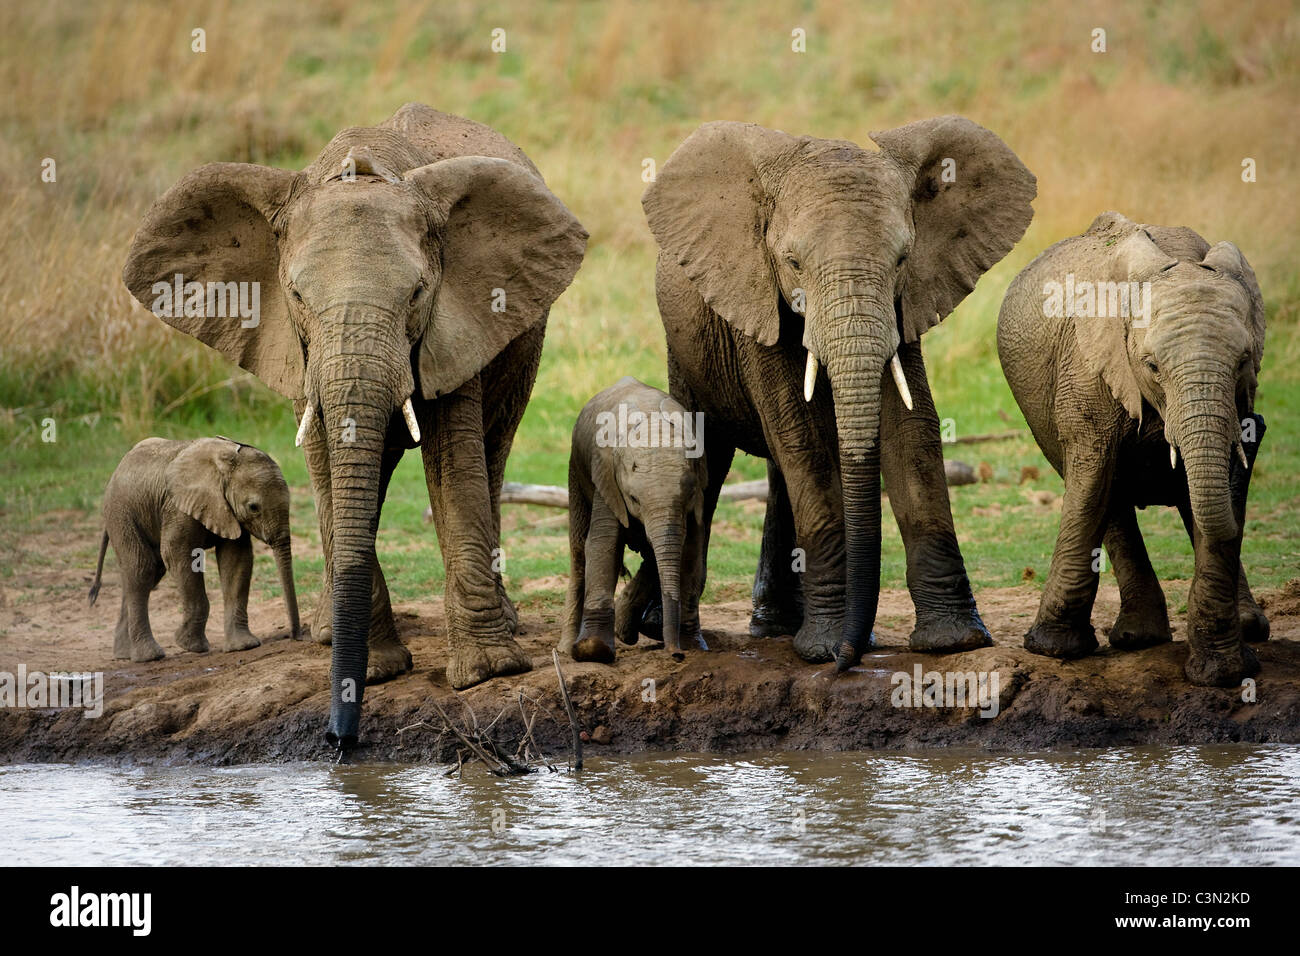 South Africa, near Rustenburg, Pilanesberg National Park. African Elephants, Loxodonta africana. Mothers and young. Stock Photo